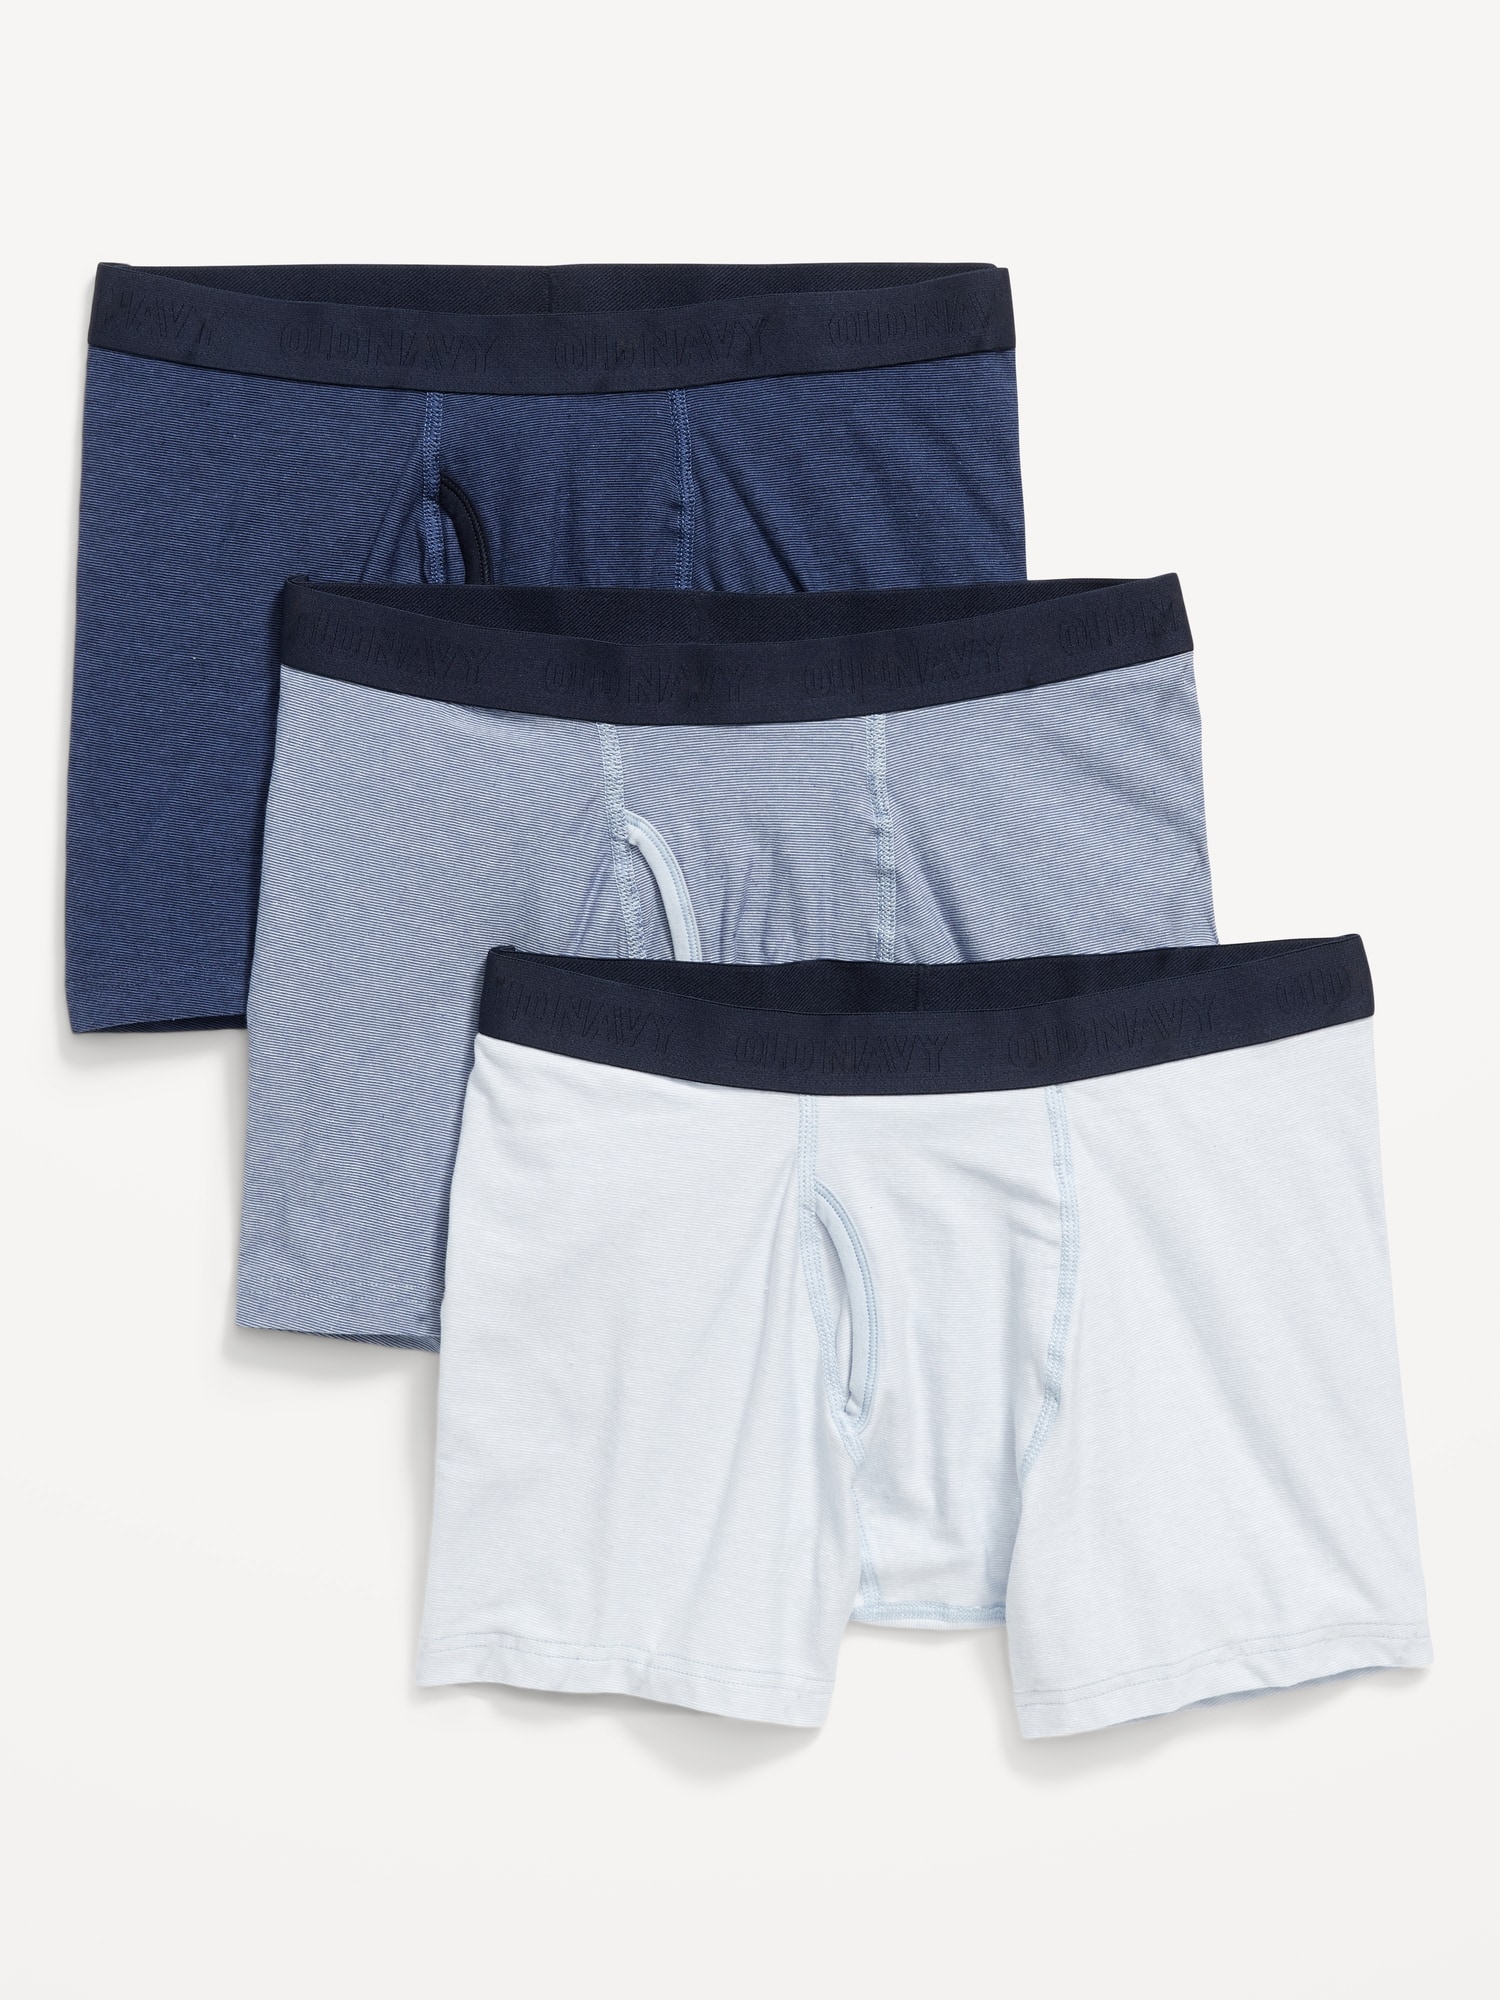 MoveMe Boxer Brief with Fly 3-Pack